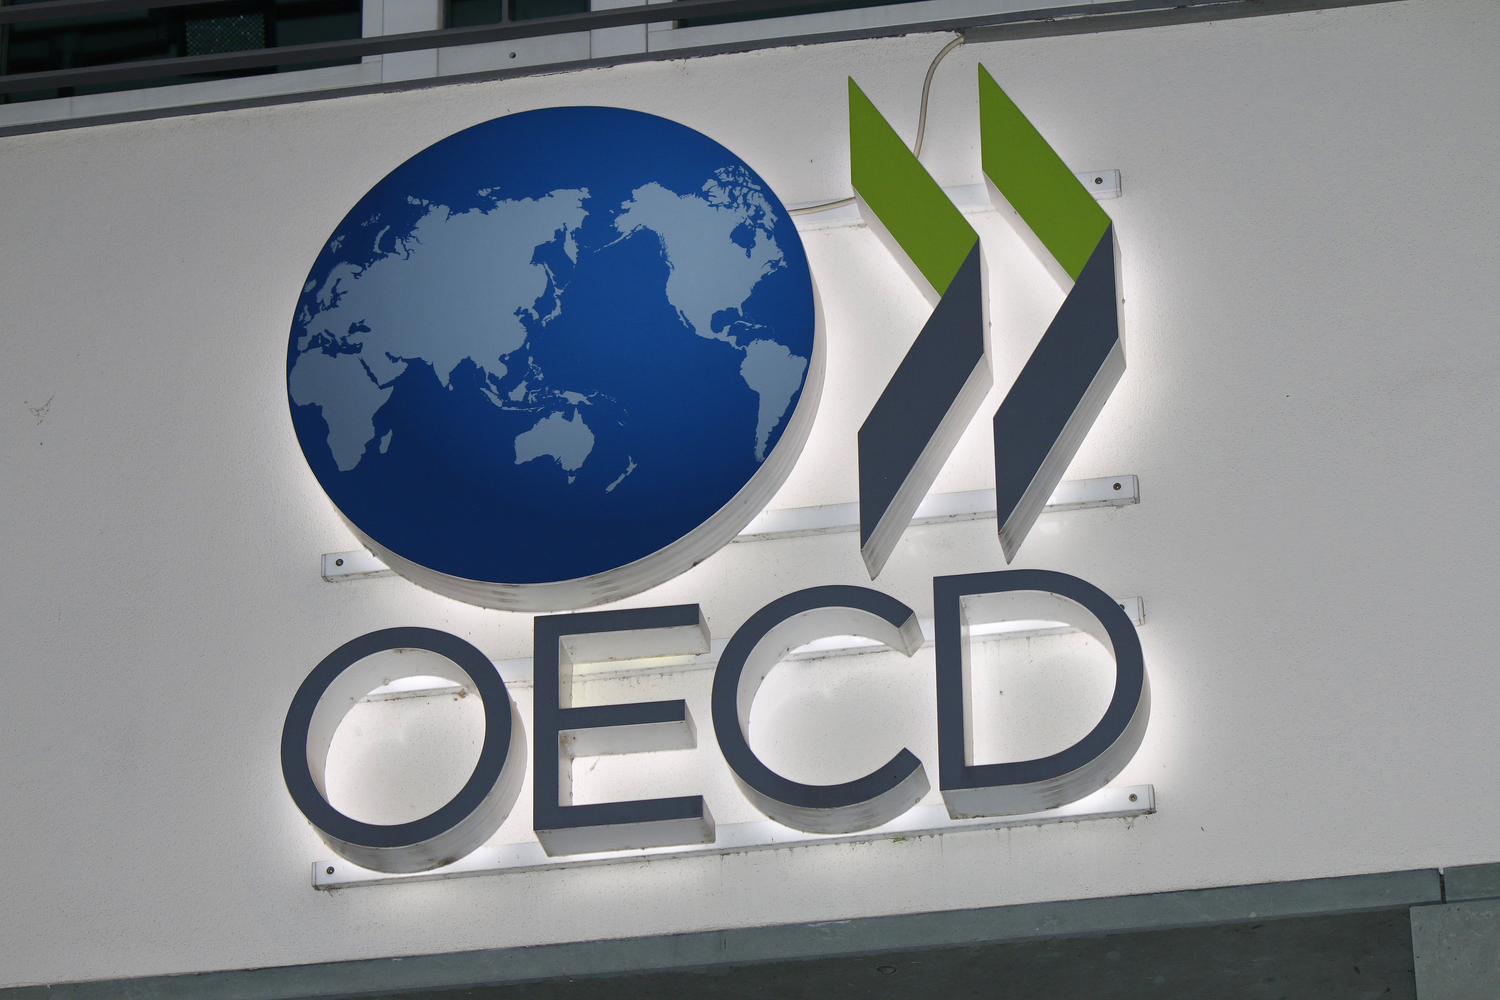 OECD: ICOs Have Financing Benefits But Aren’t A Mainstream Option